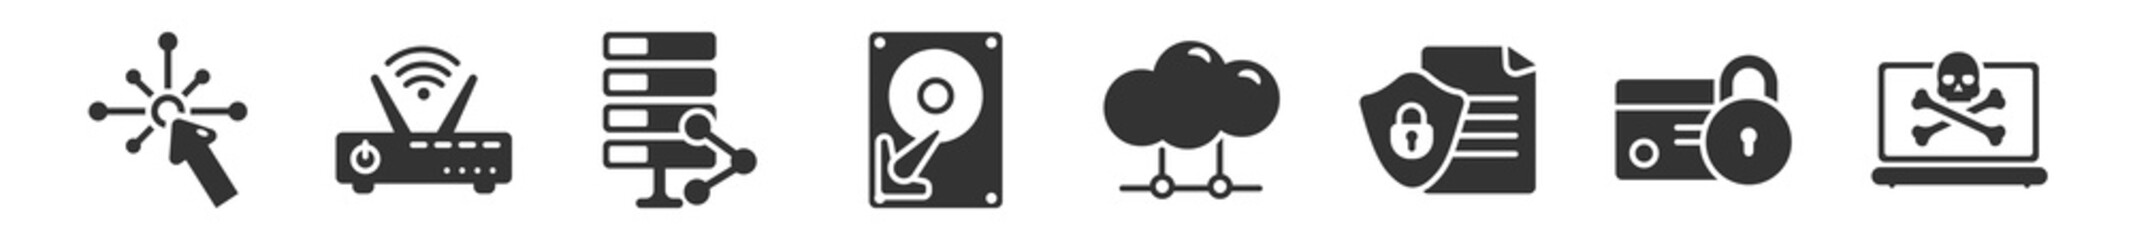 filled set of internet security and icons. glyph vector icons such as interactive, router, data share, hard drive, cloud, internet attack. vector illustration.